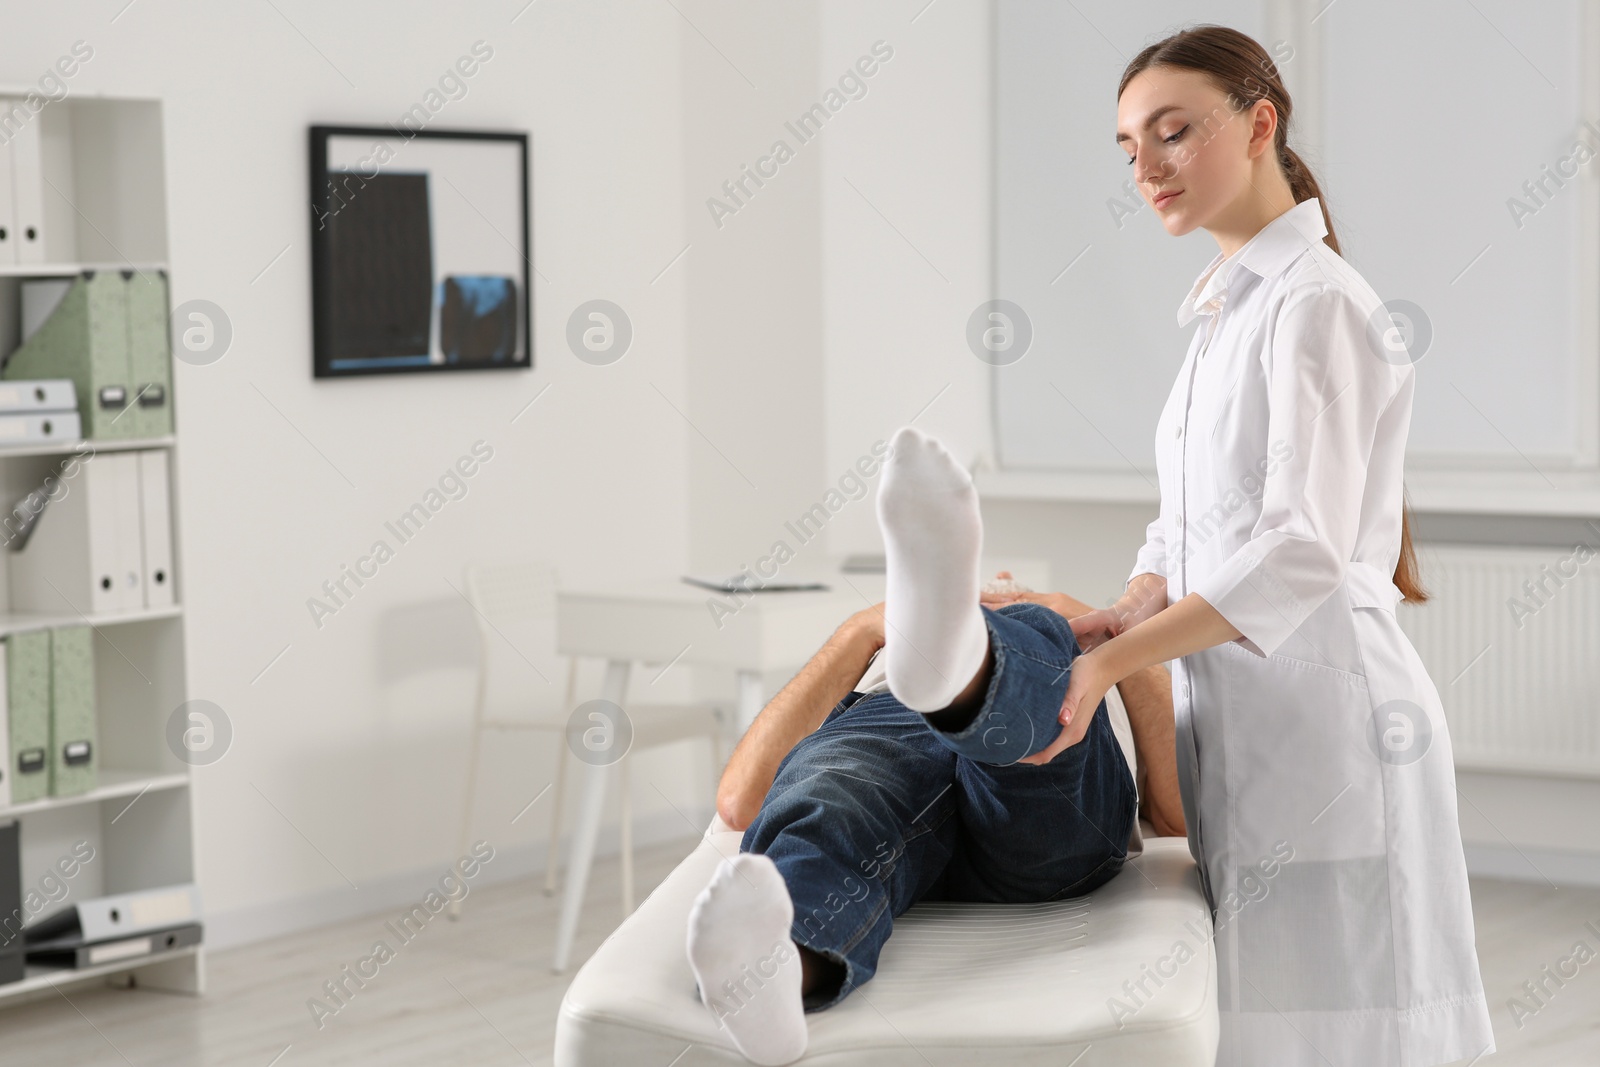 Photo of Professional orthopedist examining patient's leg in clinic